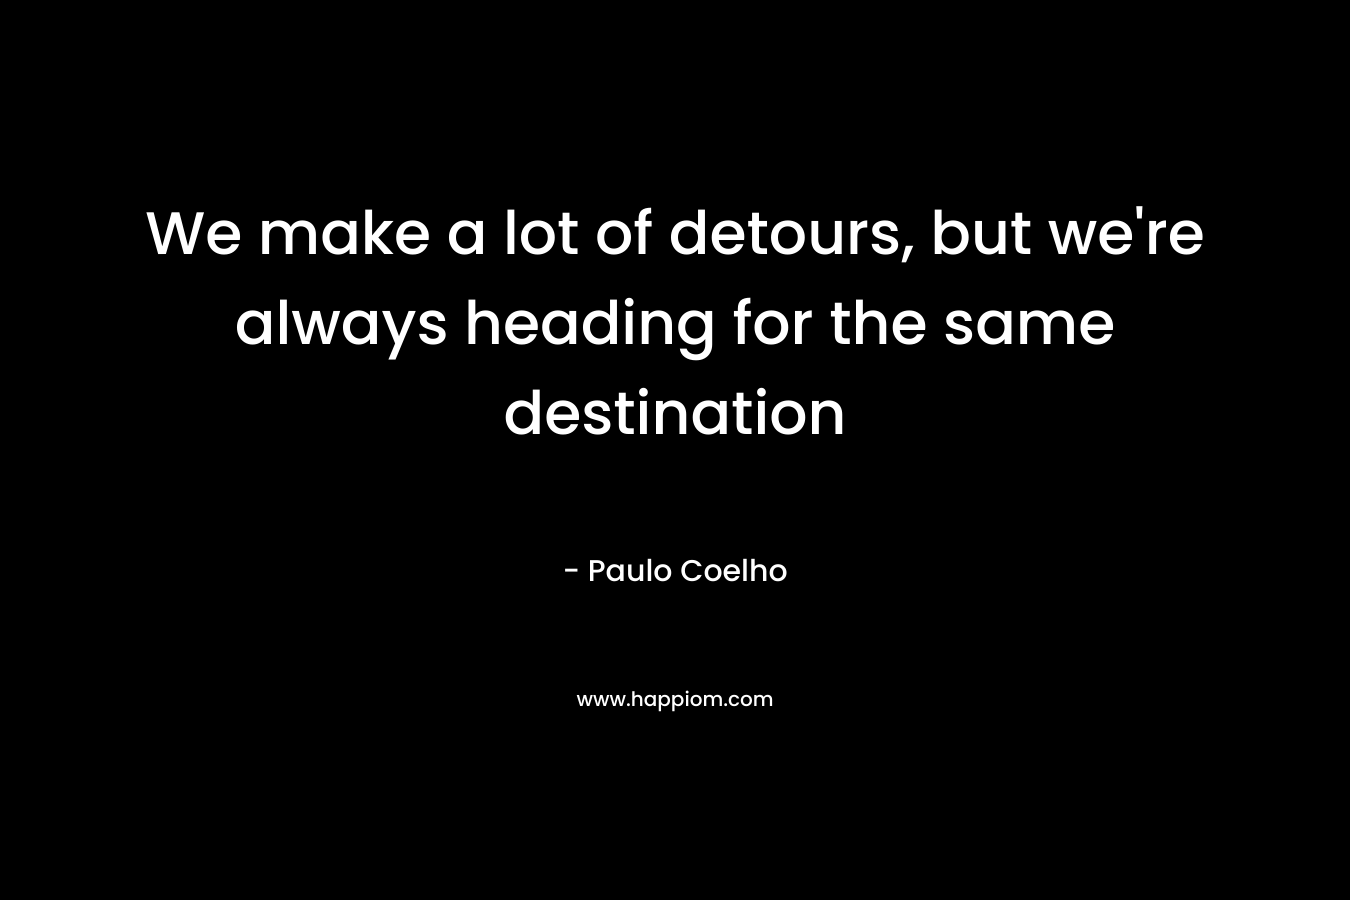 We make a lot of detours, but we’re always heading for the same destination – Paulo Coelho